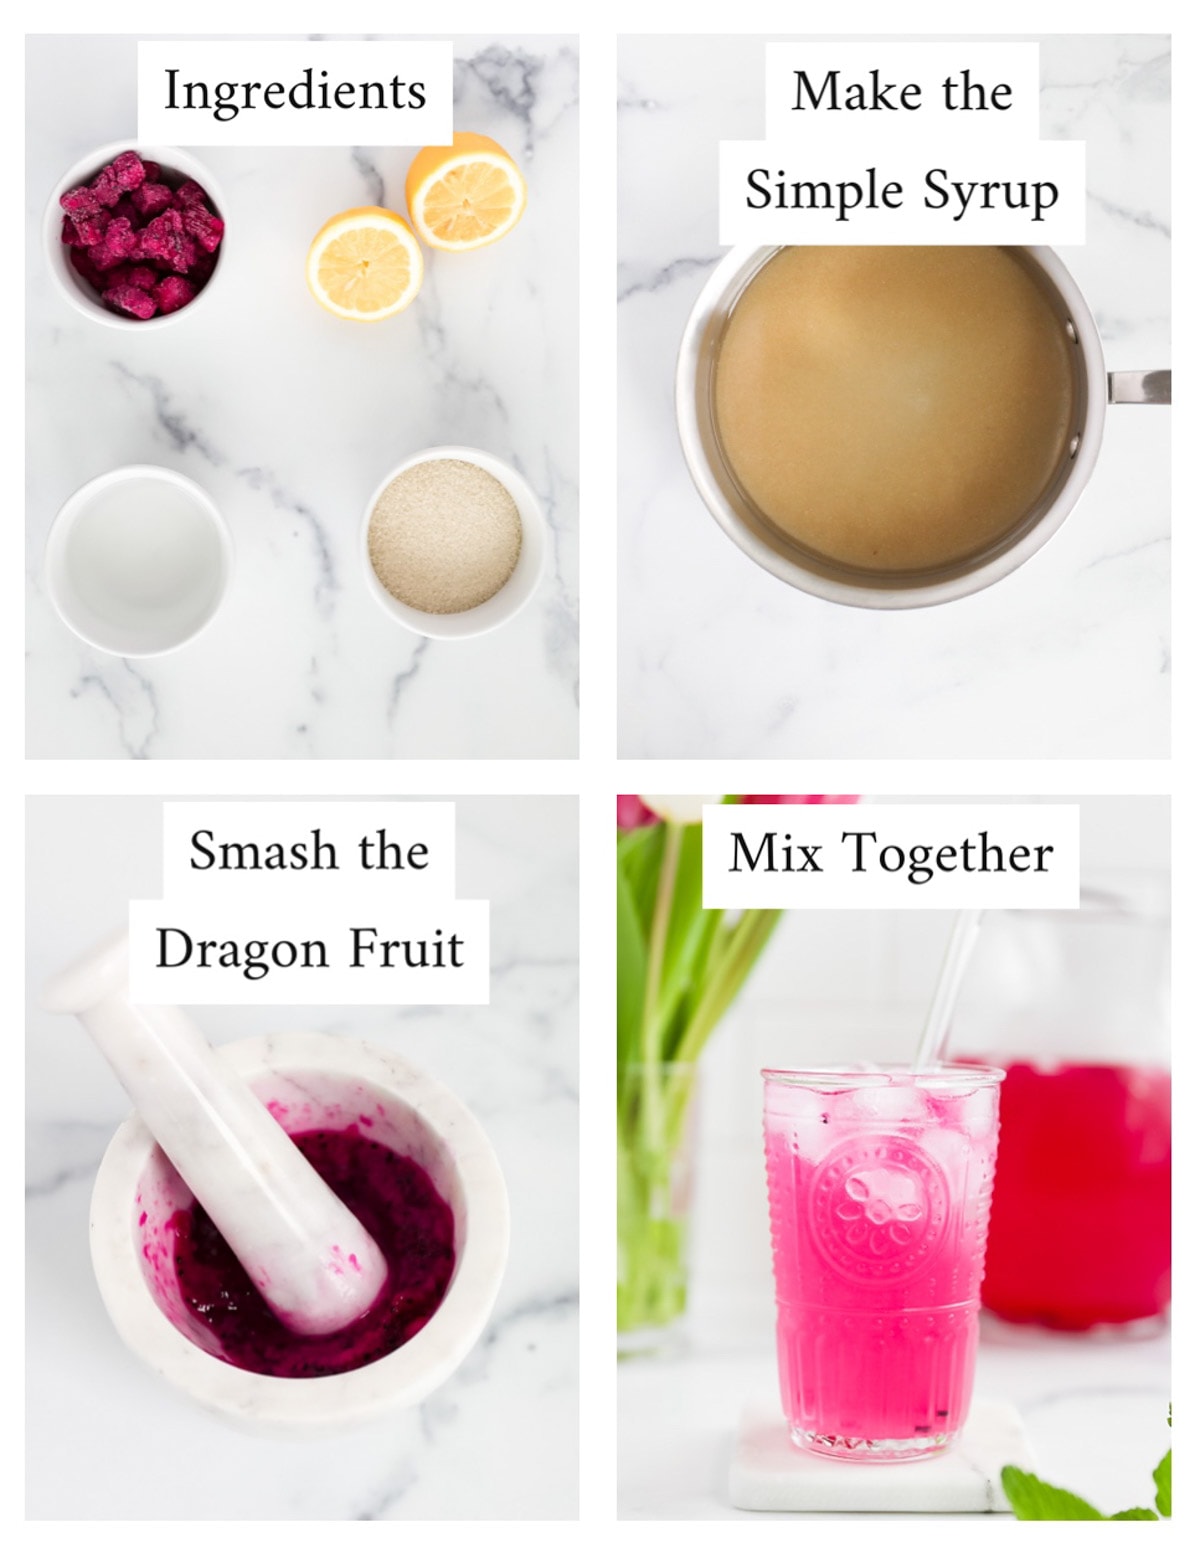 Step by step instructions for making dragonfruit lemonade including: ingredients, make the simple syrup, smash the dragon fruit, mix together